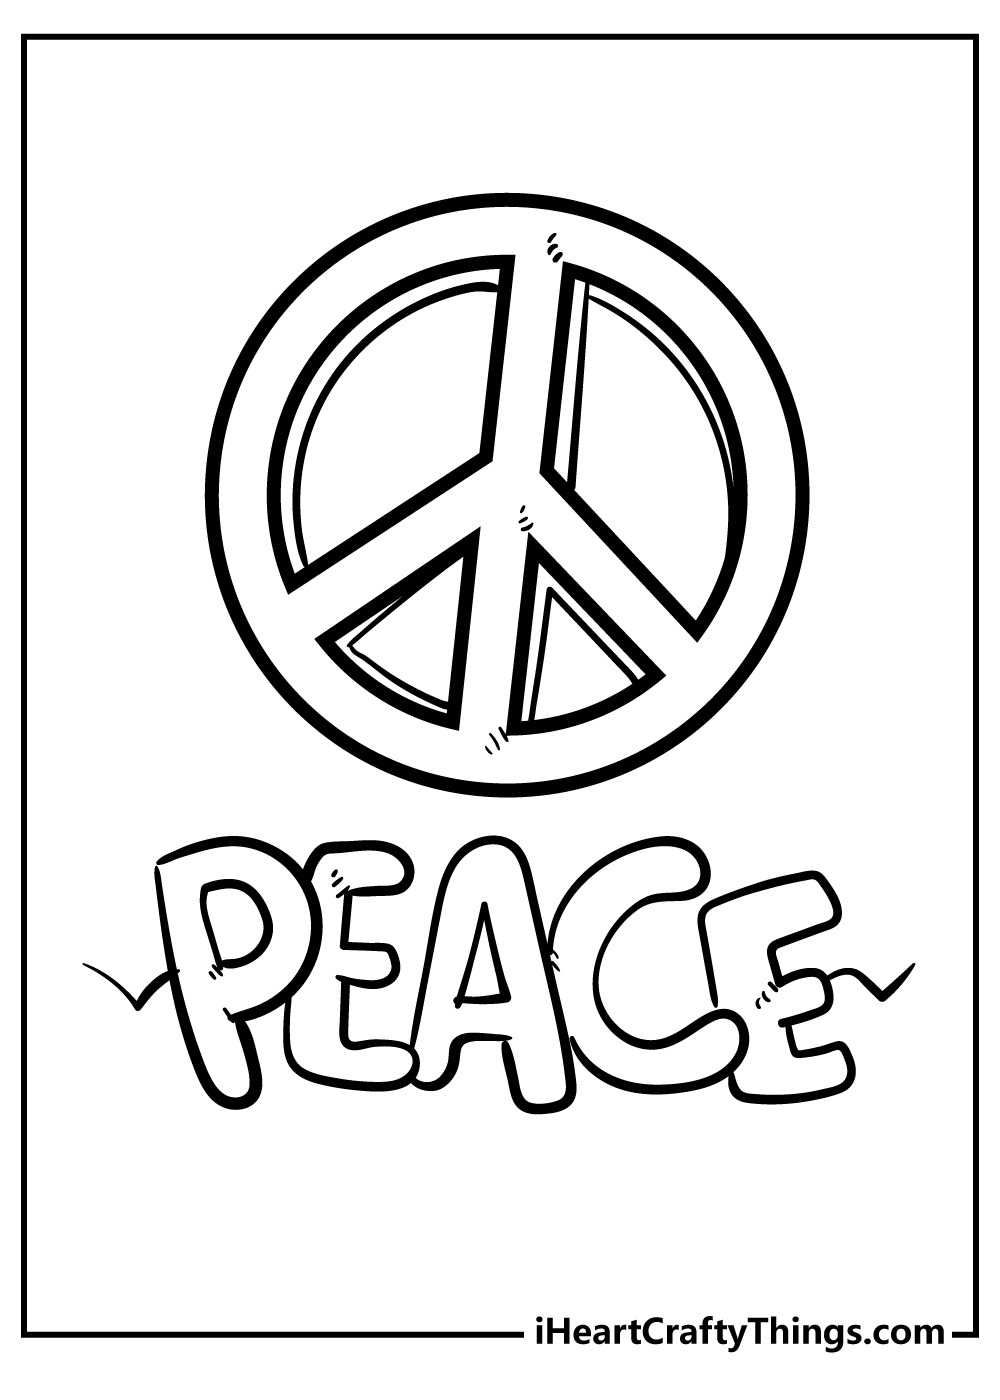 Peace Coloring Pages for adults free printable